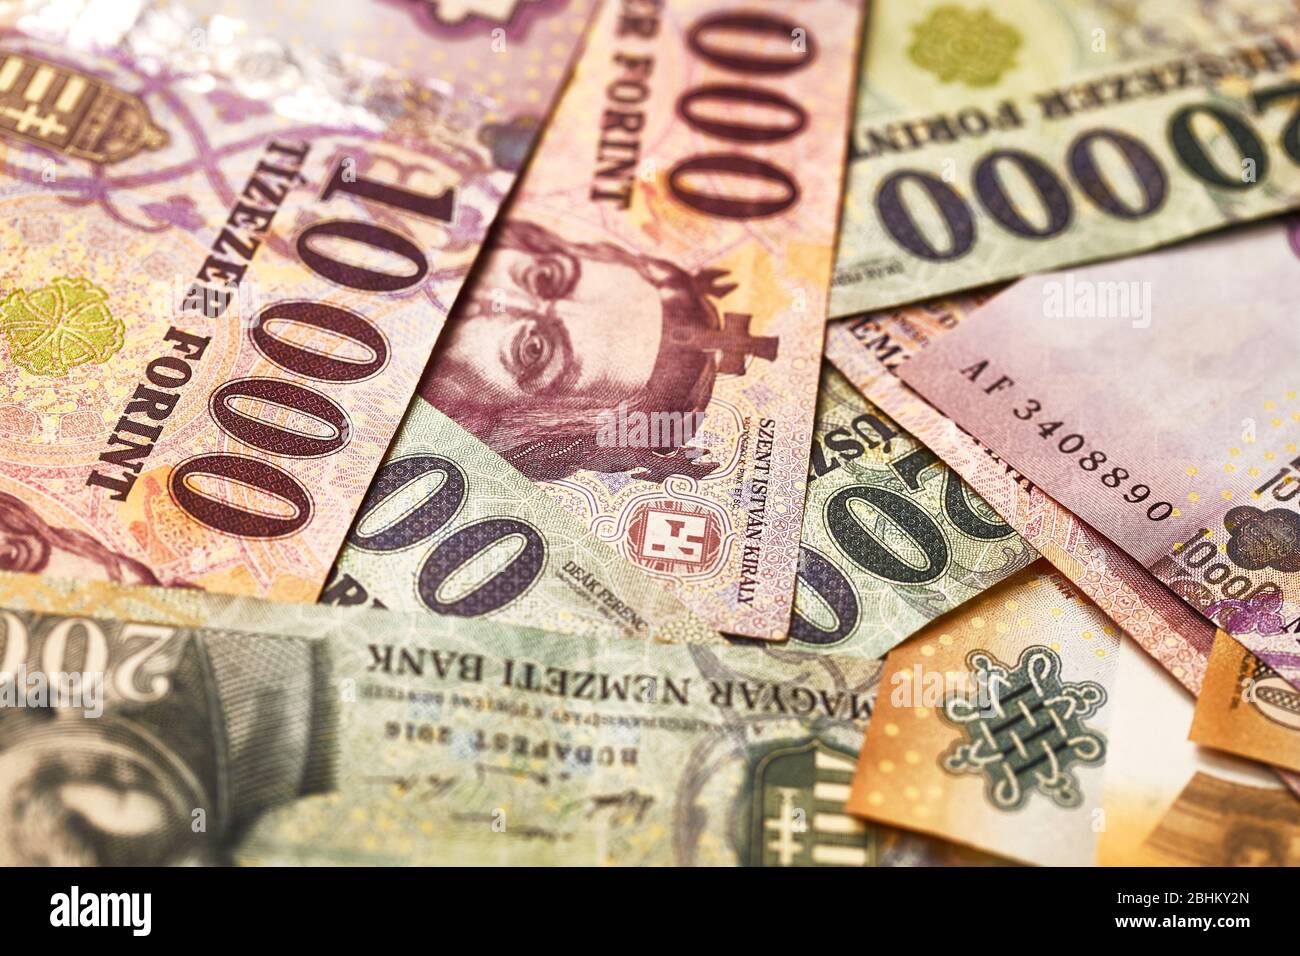 Banknotes Background, Hungarian Forints Stock Photo